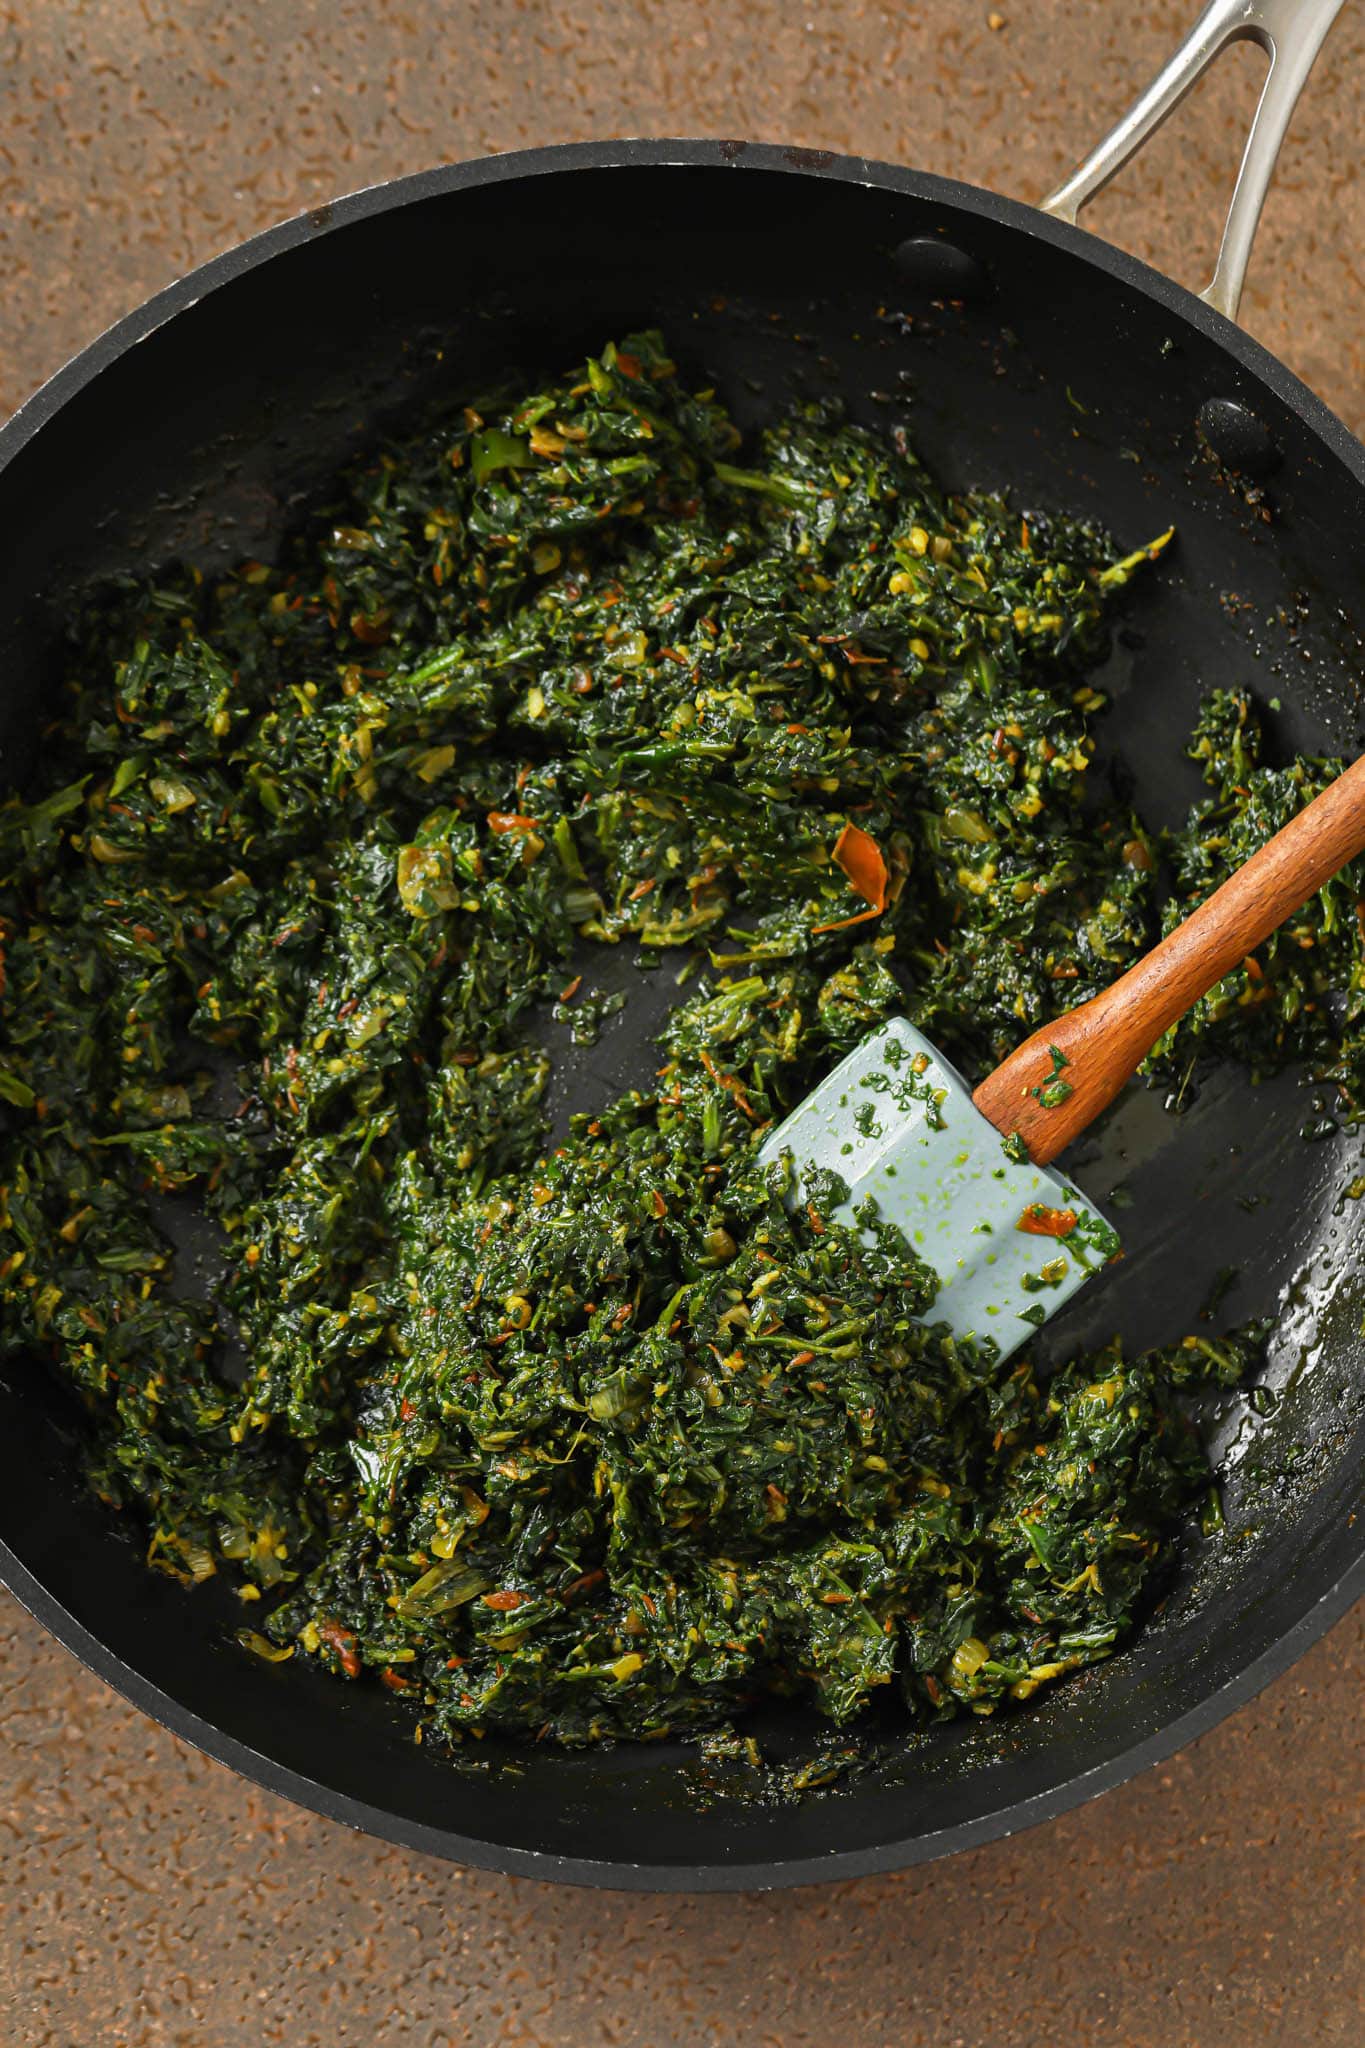 Cooked down spinach-onion-tomato mixture in a skillet with a blue spatula.